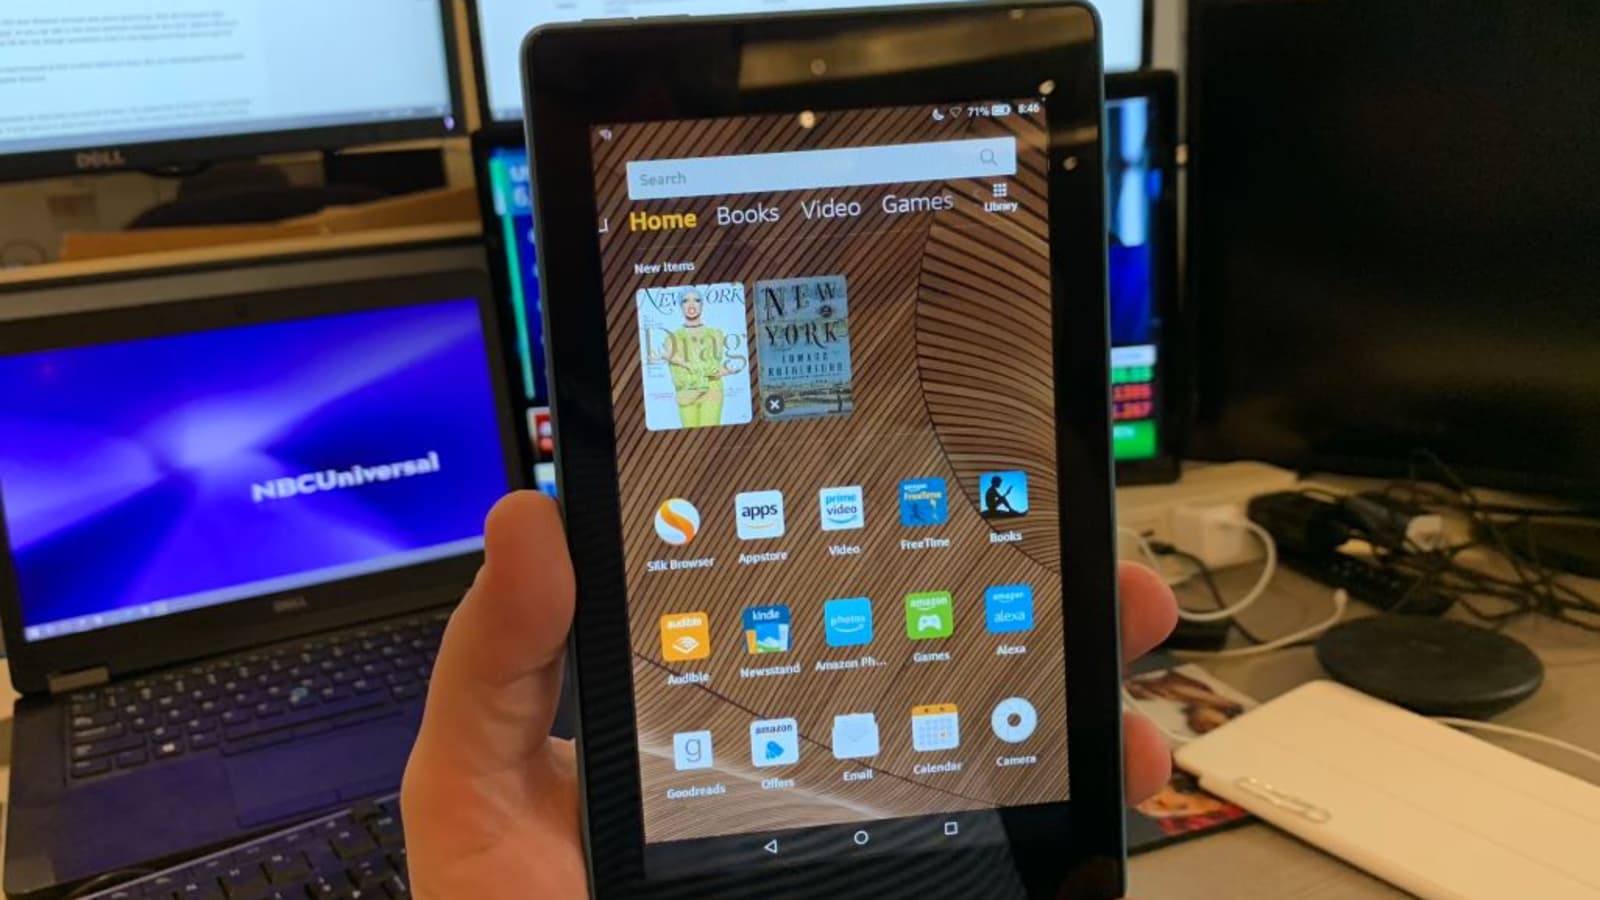 Amazon Fire 7 2019 Tablet Review Skip It Buy Fire Hd8 Instead - youtube how to play roblox on kindle fires